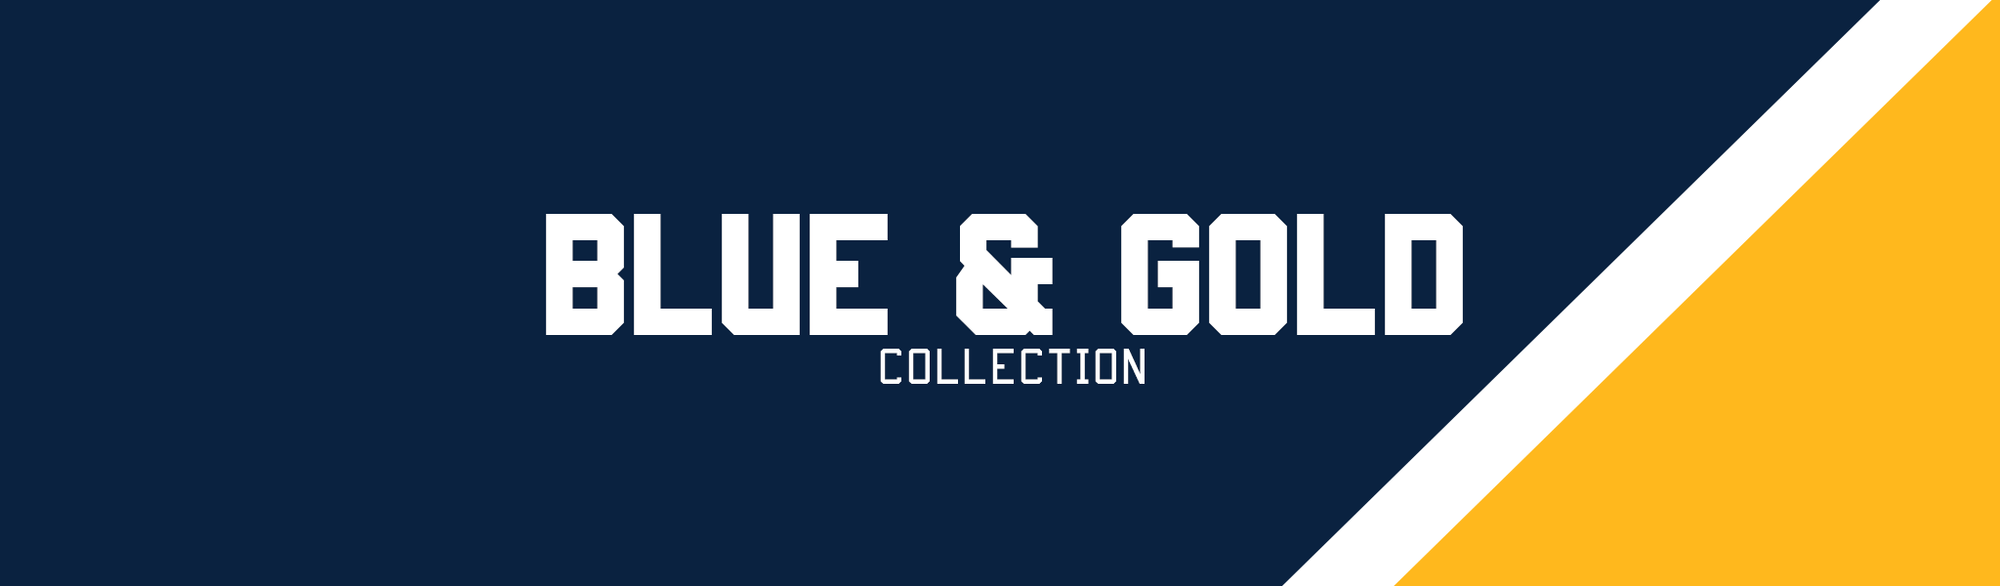 Blue and Gold Logo - Blue & Gold Collection | The Shop Indy